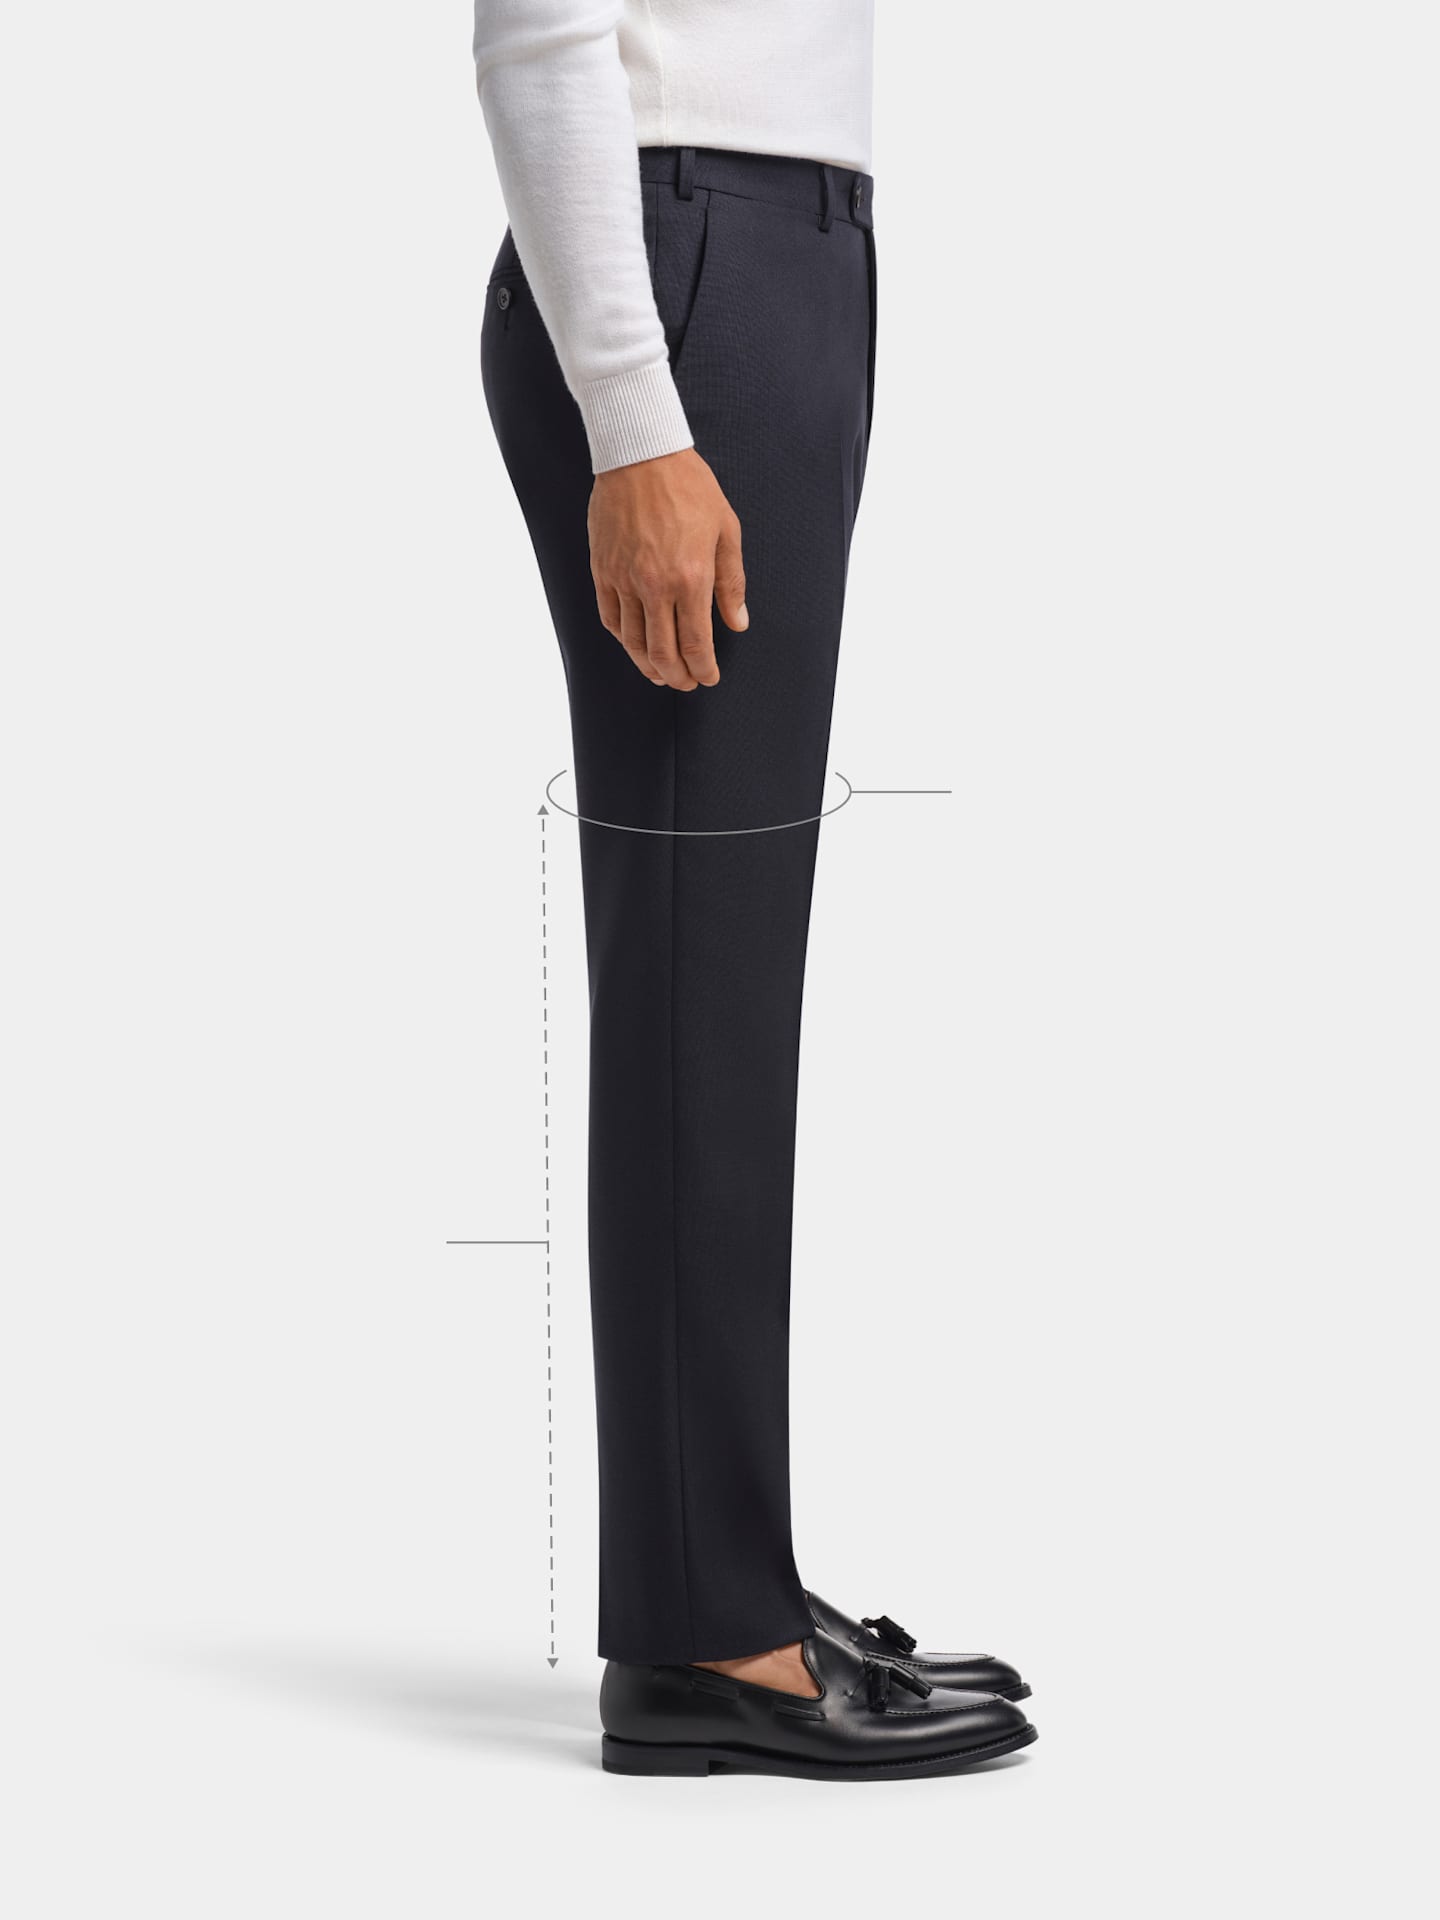 Profile view illustrating a slim, tapered leg fit.